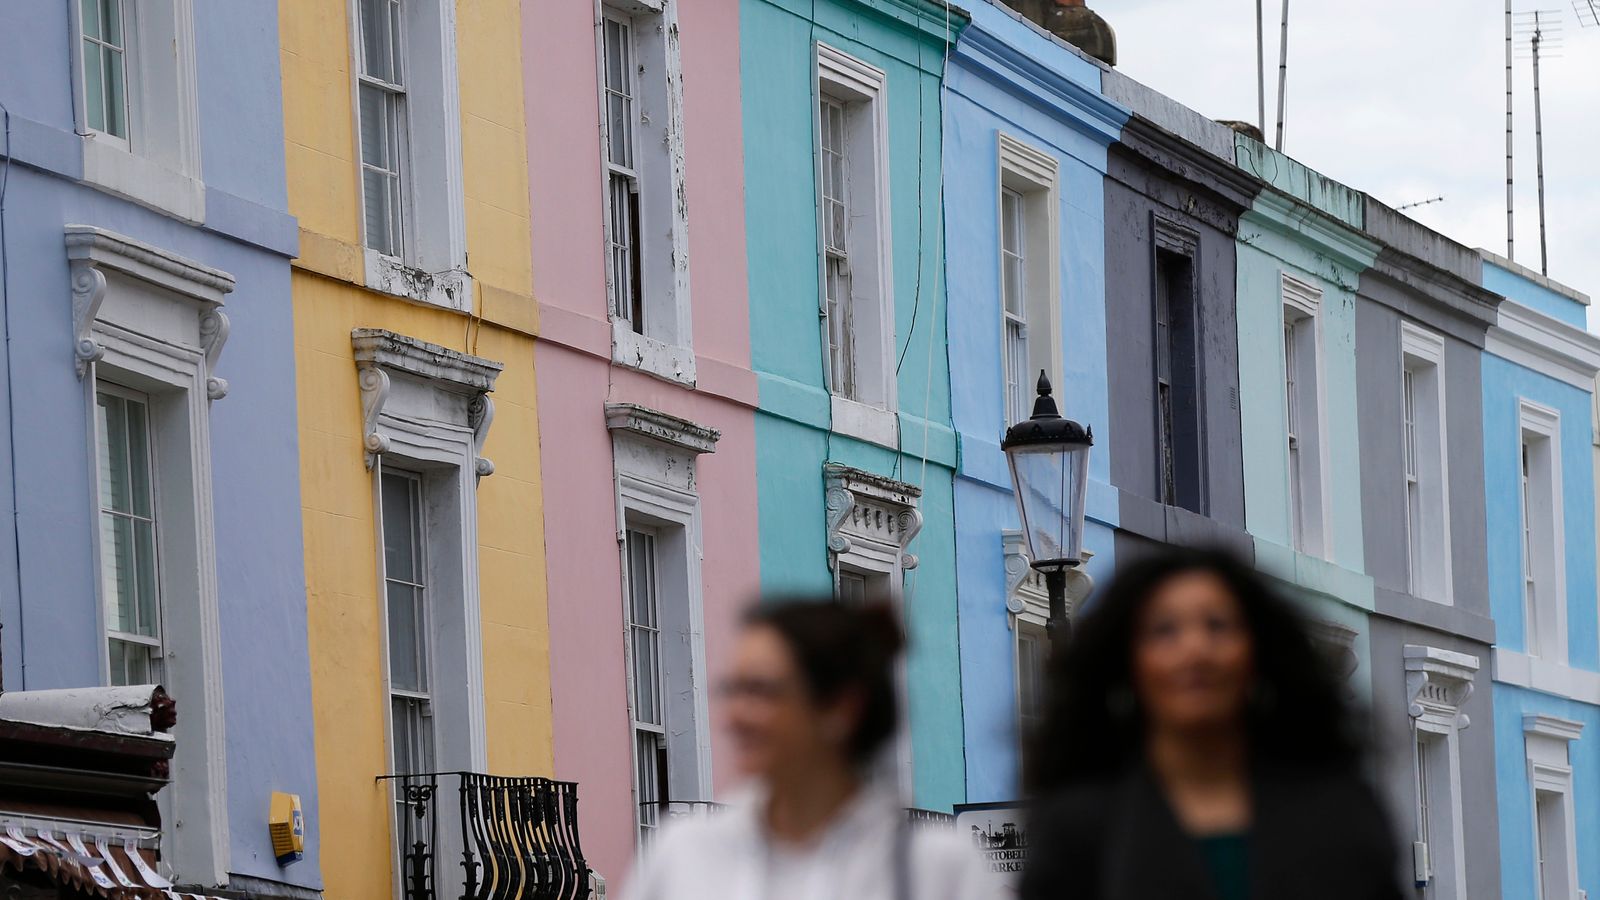 House prices still unaffordable for the average earner despite wage rises - Nationwide